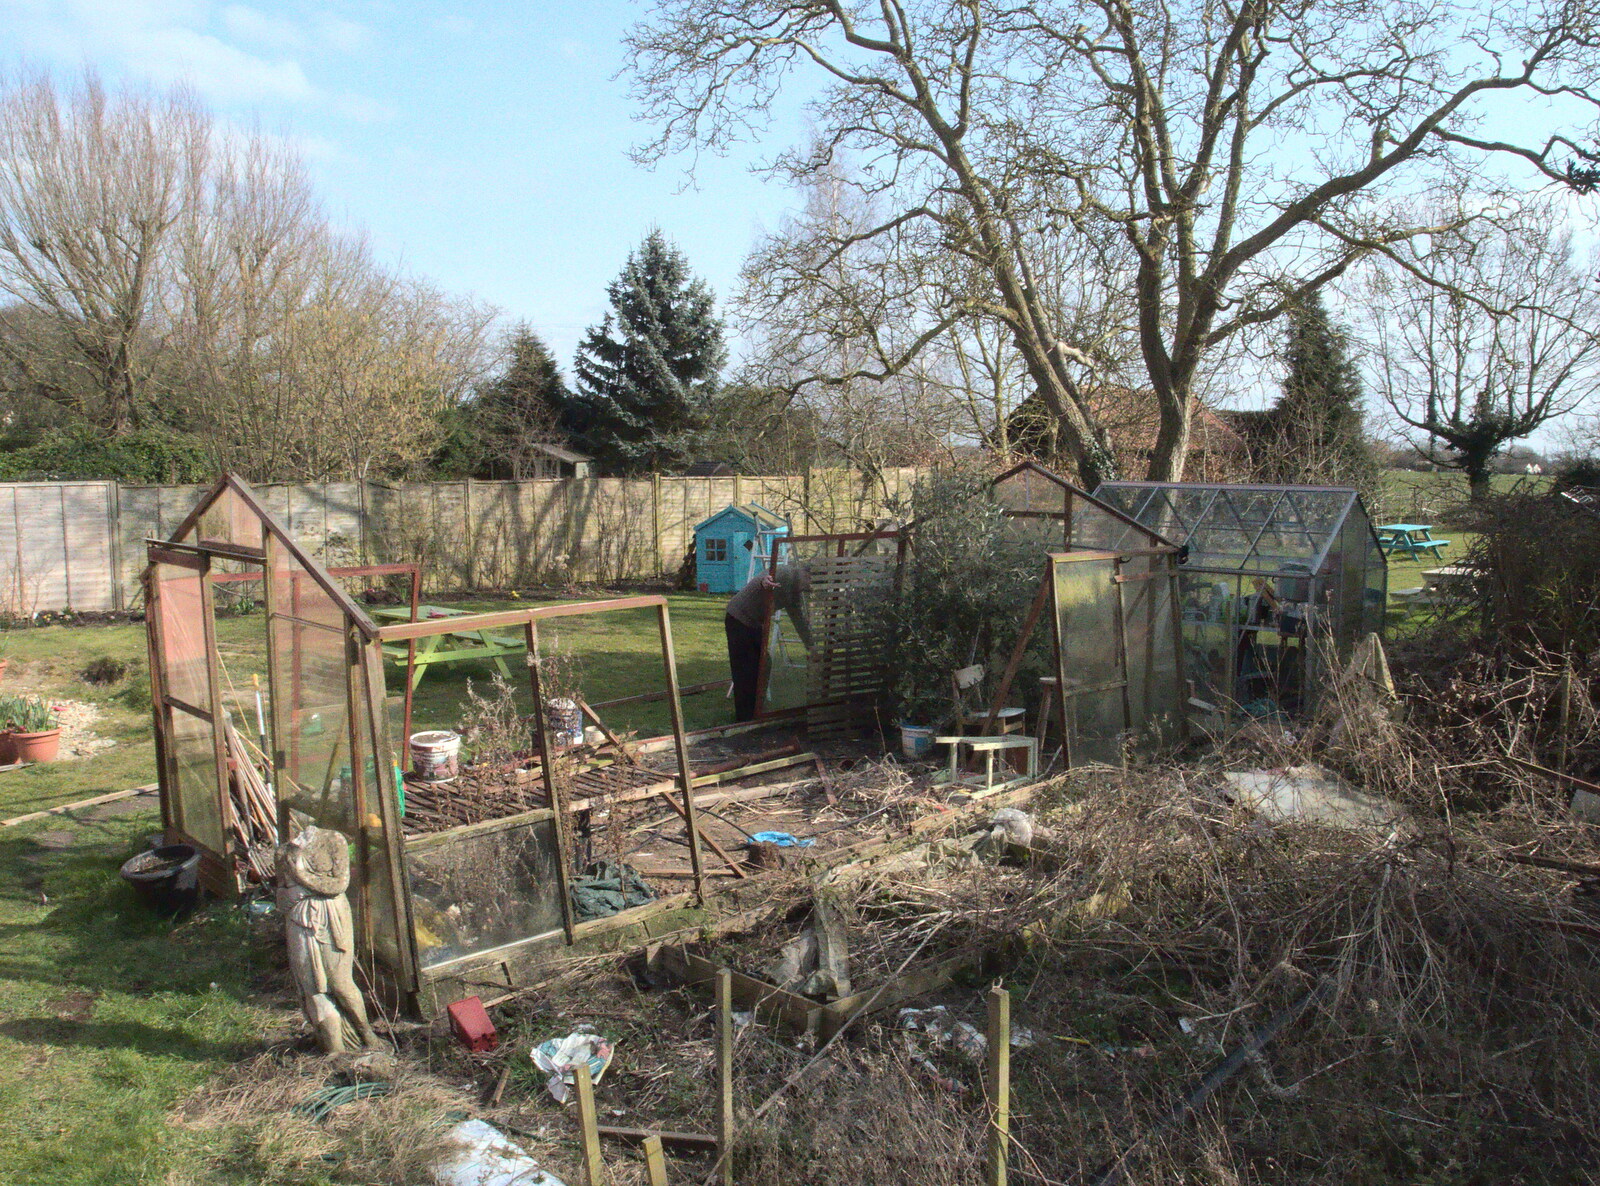 Greenhouse demolition from A Crashed Car and Greenhouse Demolition, Brome, Suffolk - 20th March 2015